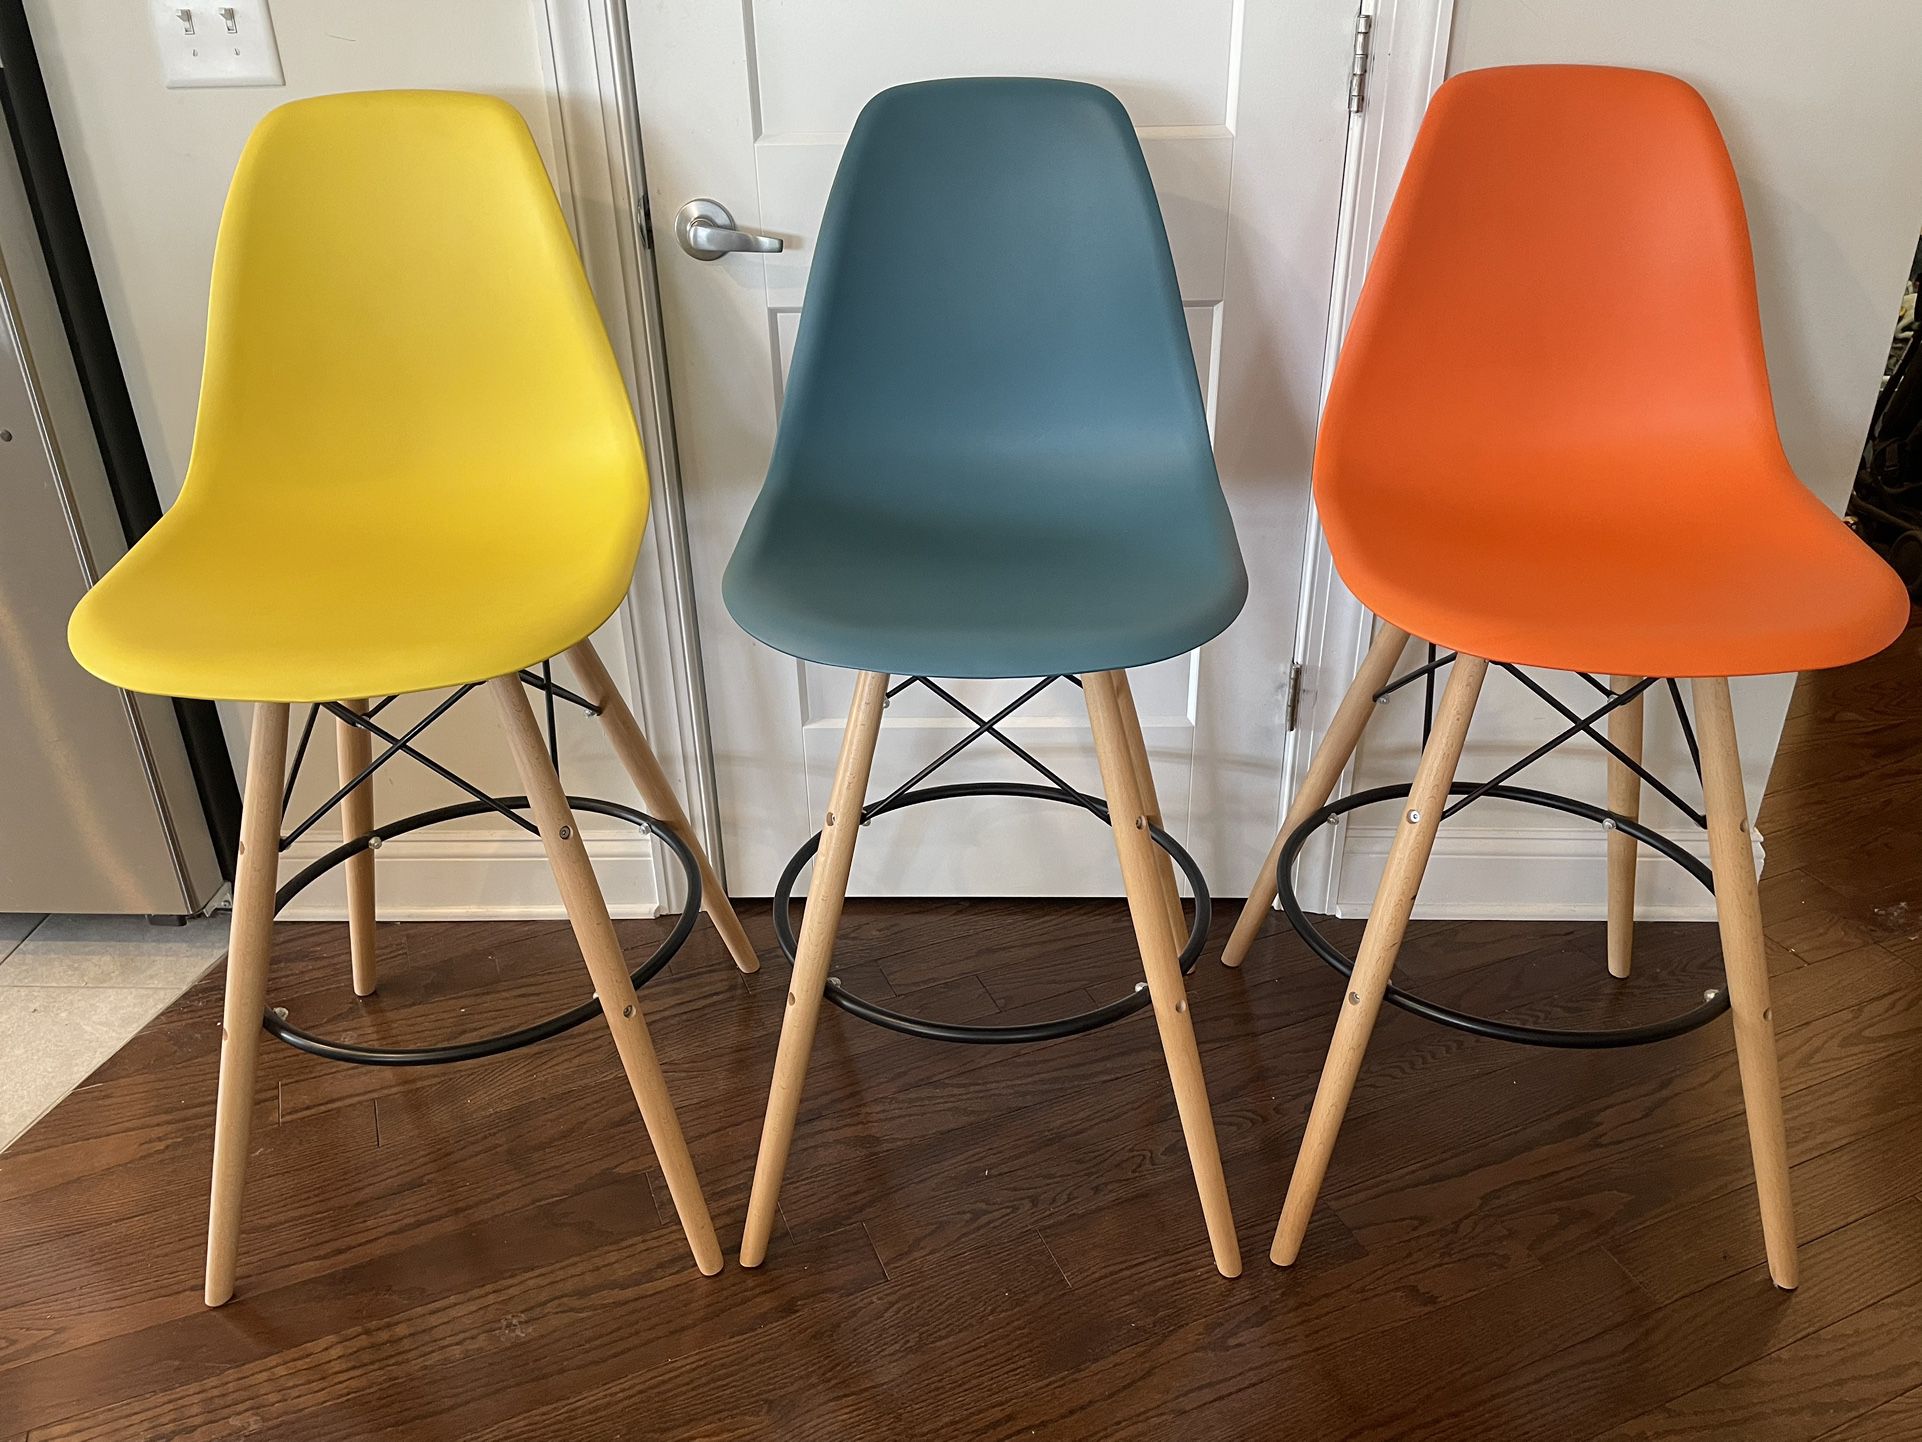 28” High Back Bar Stools In Fun Colors 